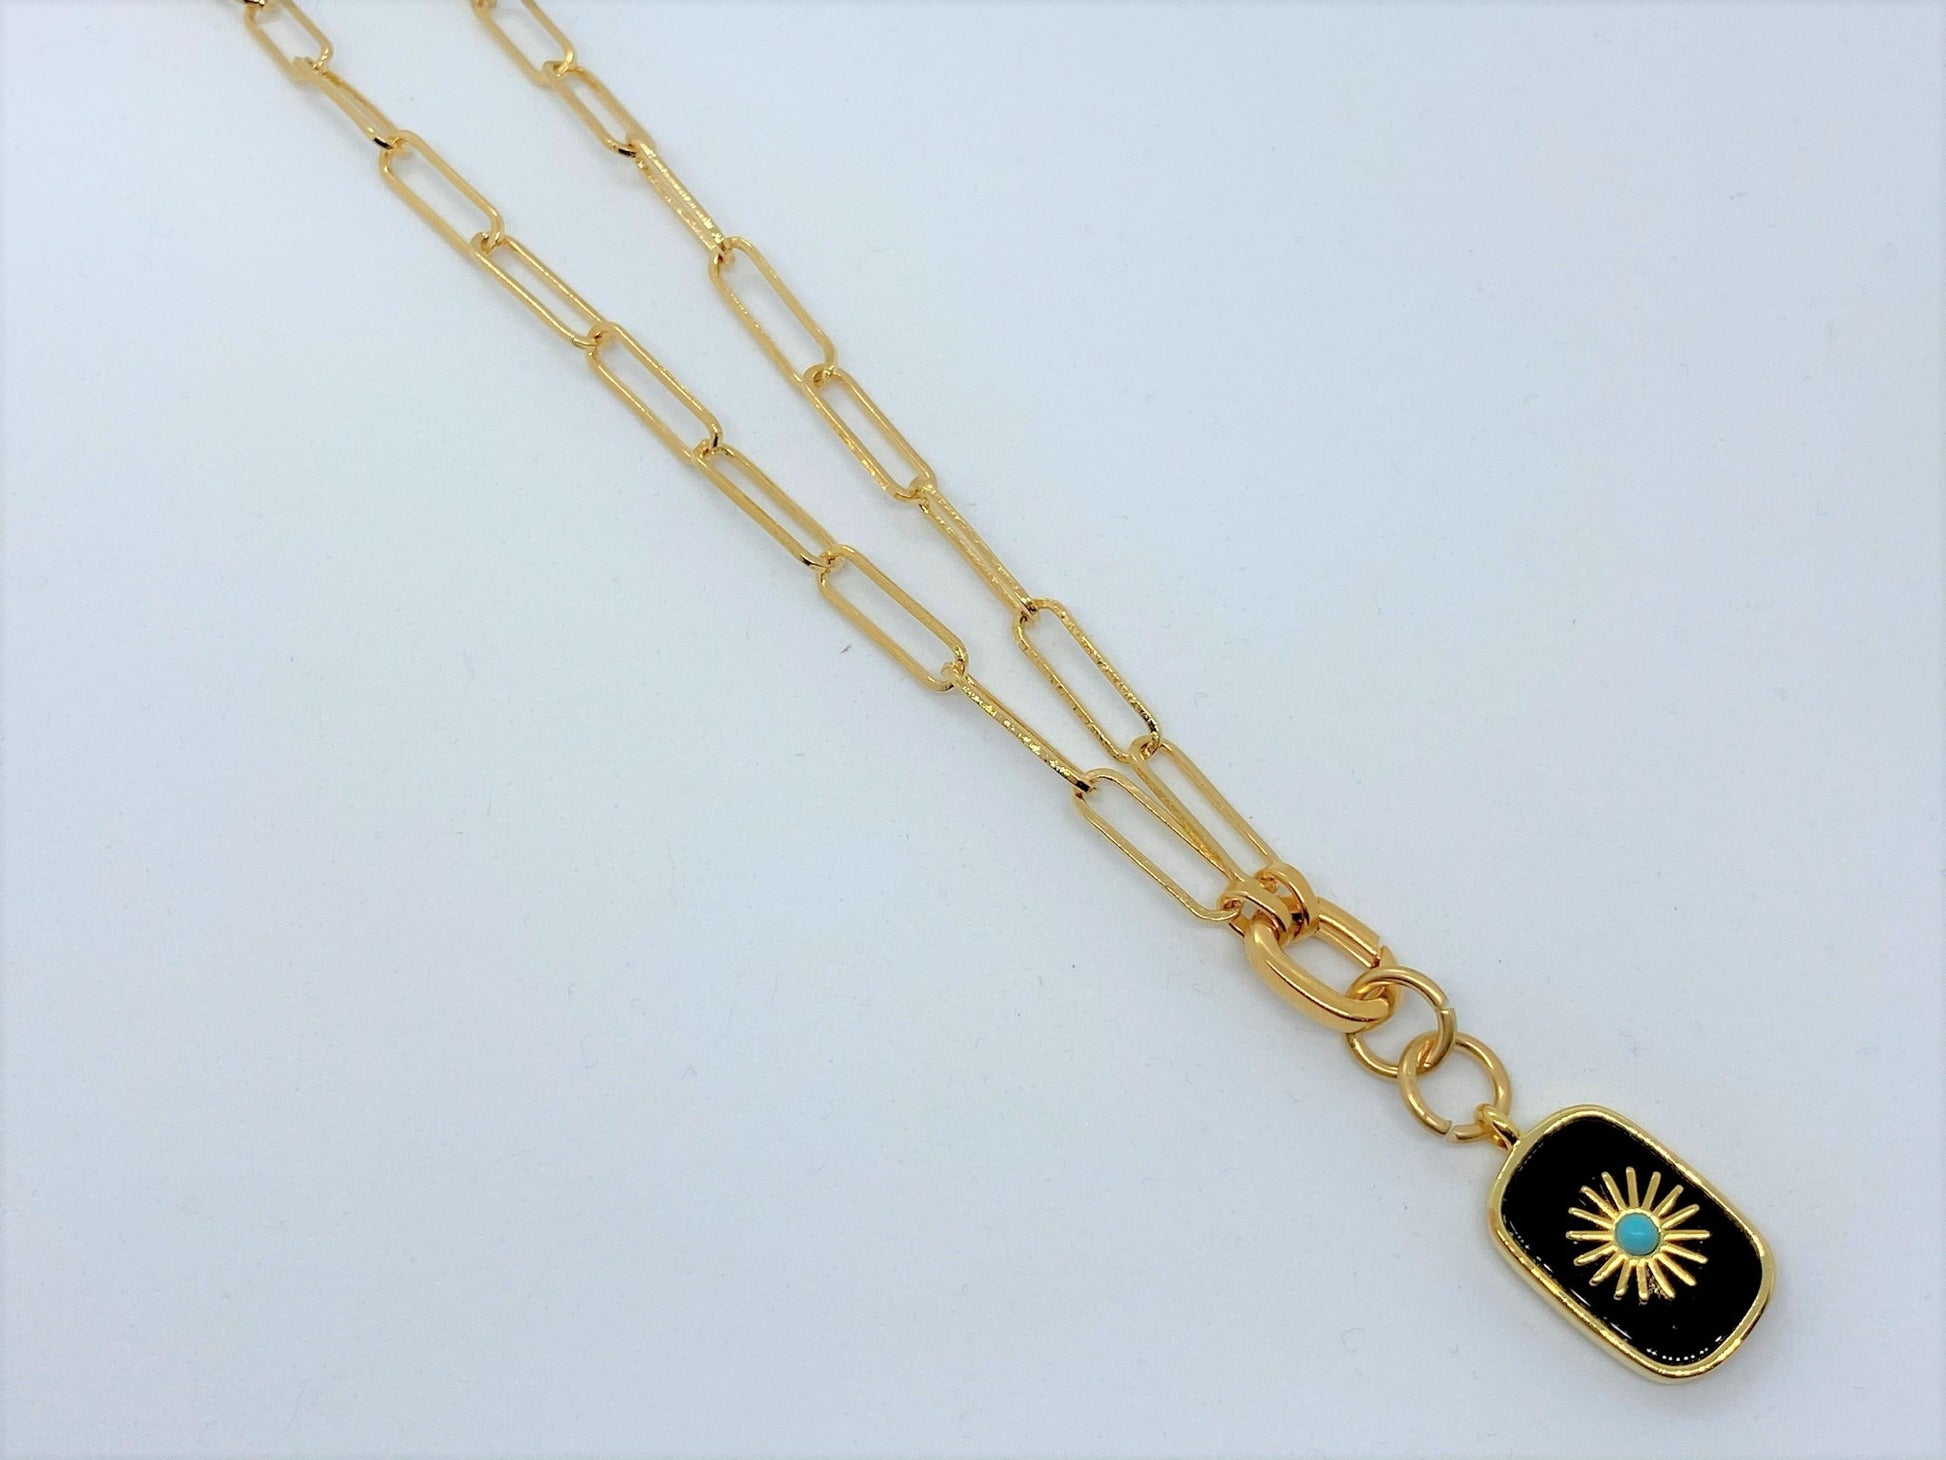 Gold Plated Paperclip Necklace with a Gemstone Pendant - Emmis Jewelry, Necklace, [product_color]